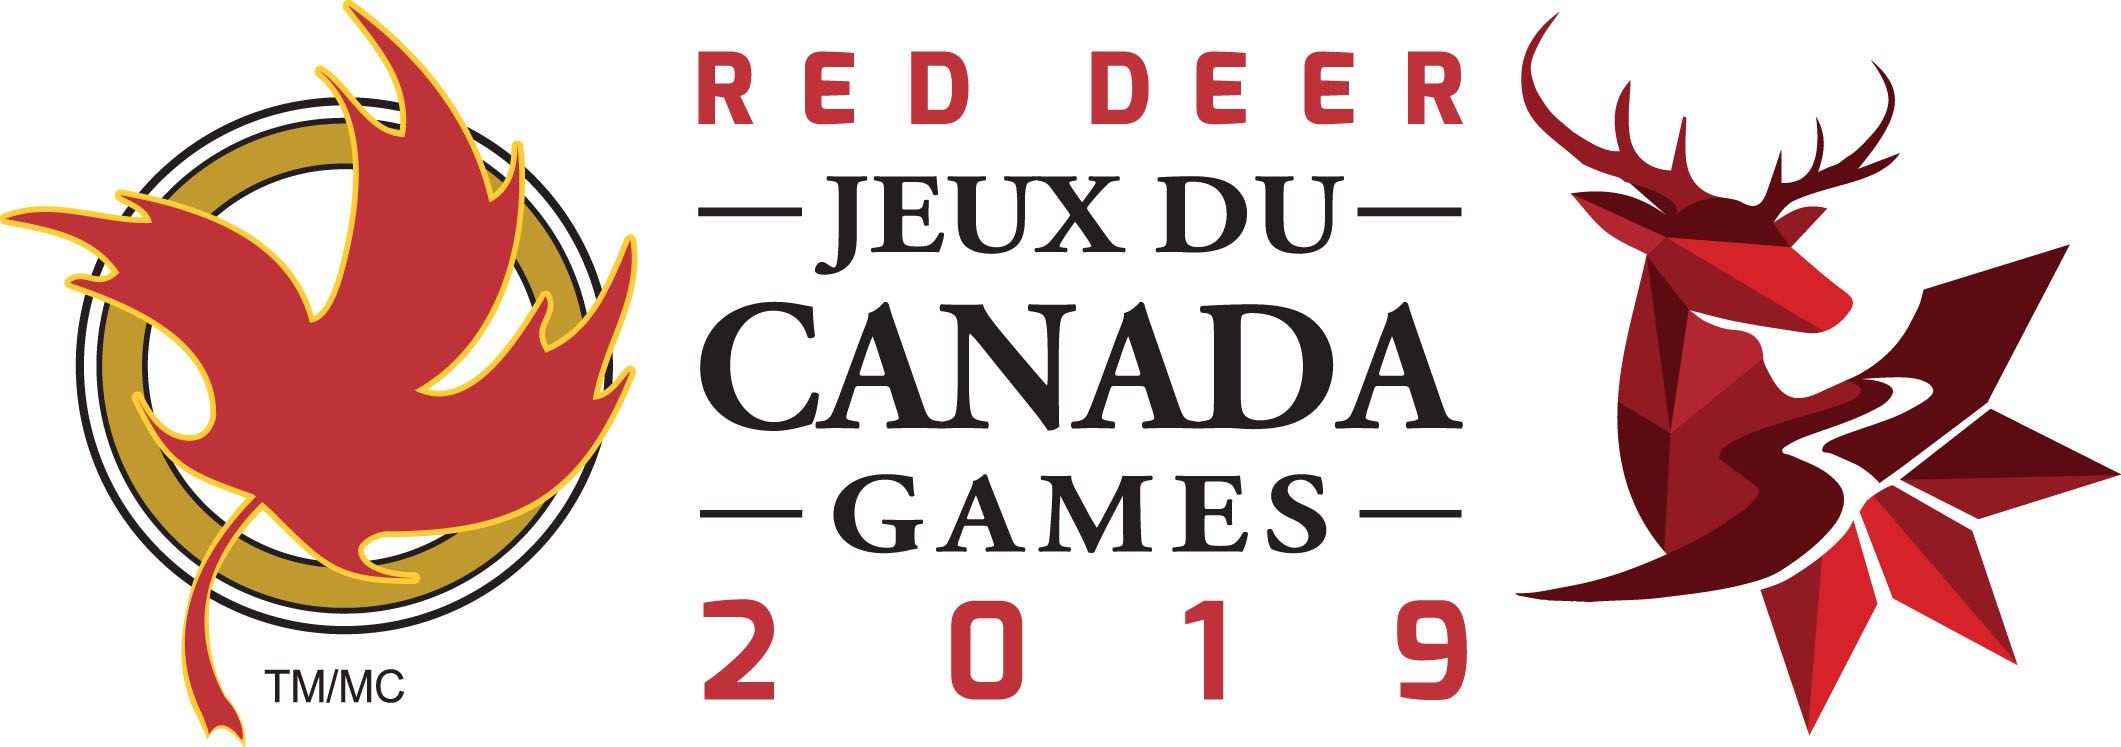 UNVEILING - Pictured here is the 2019 Canada Winter Games logo which was unveiled earlier this week.